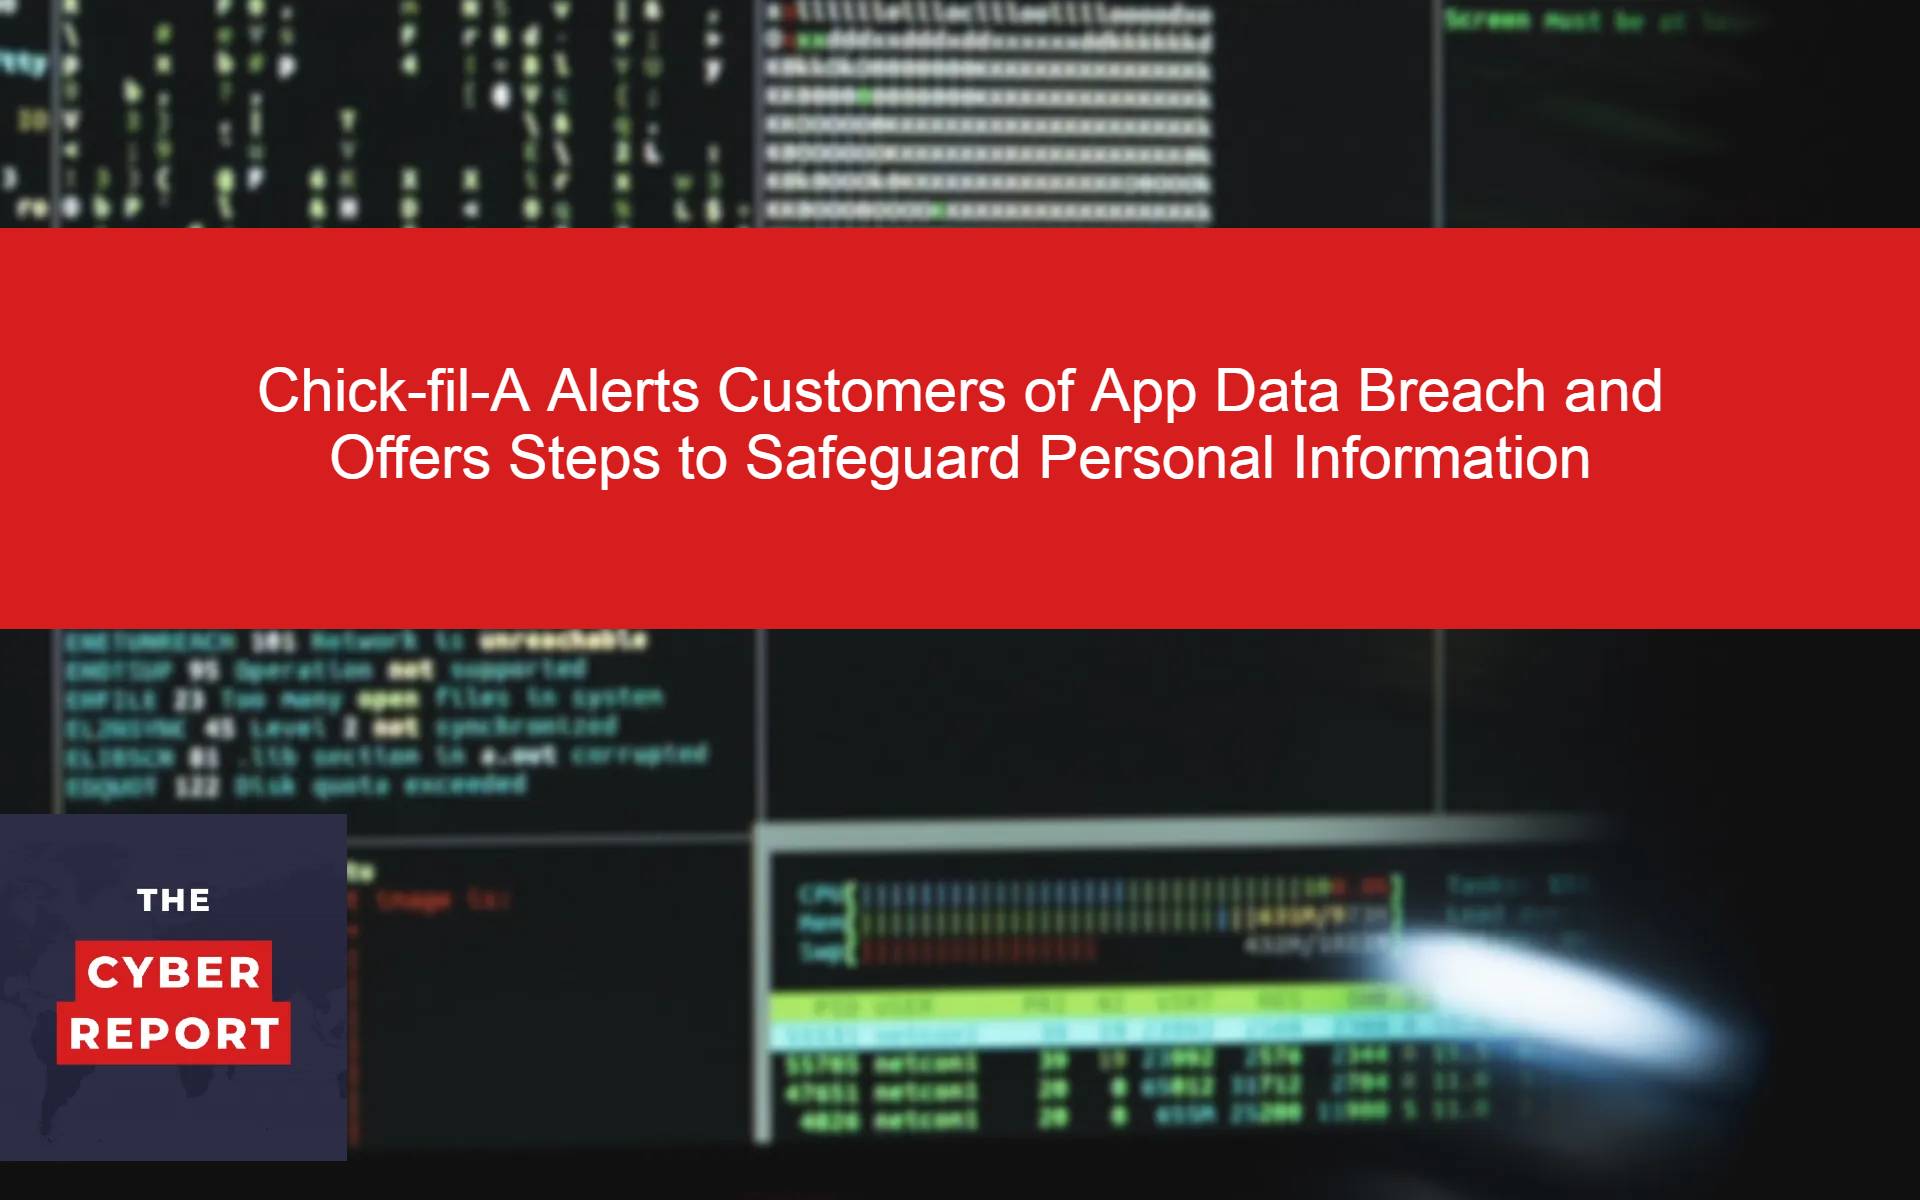 Chick-fil-A Alerts Customers of App Data Breach and Offers Steps to Safeguard Personal Information